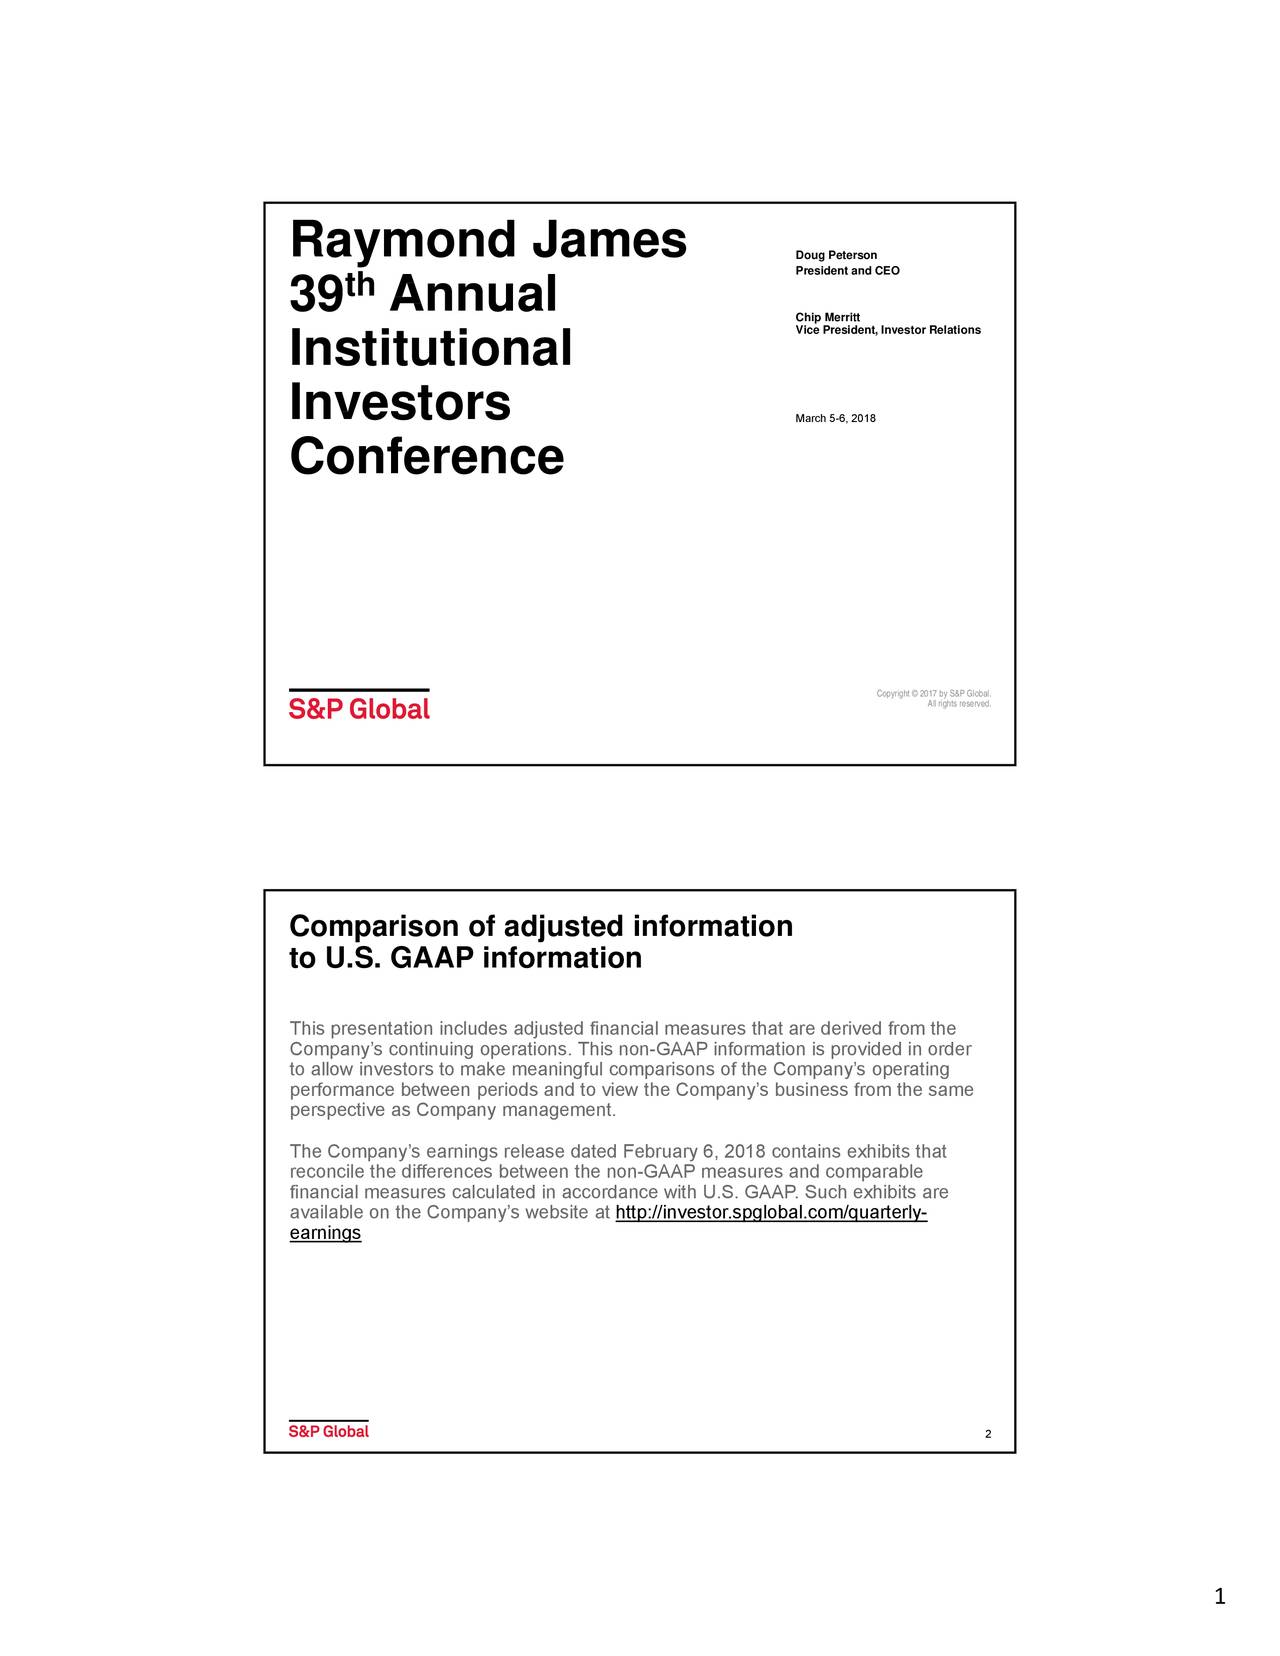 S&P Global (SPGI) Presents At Raymond James 39th Annual Institutional